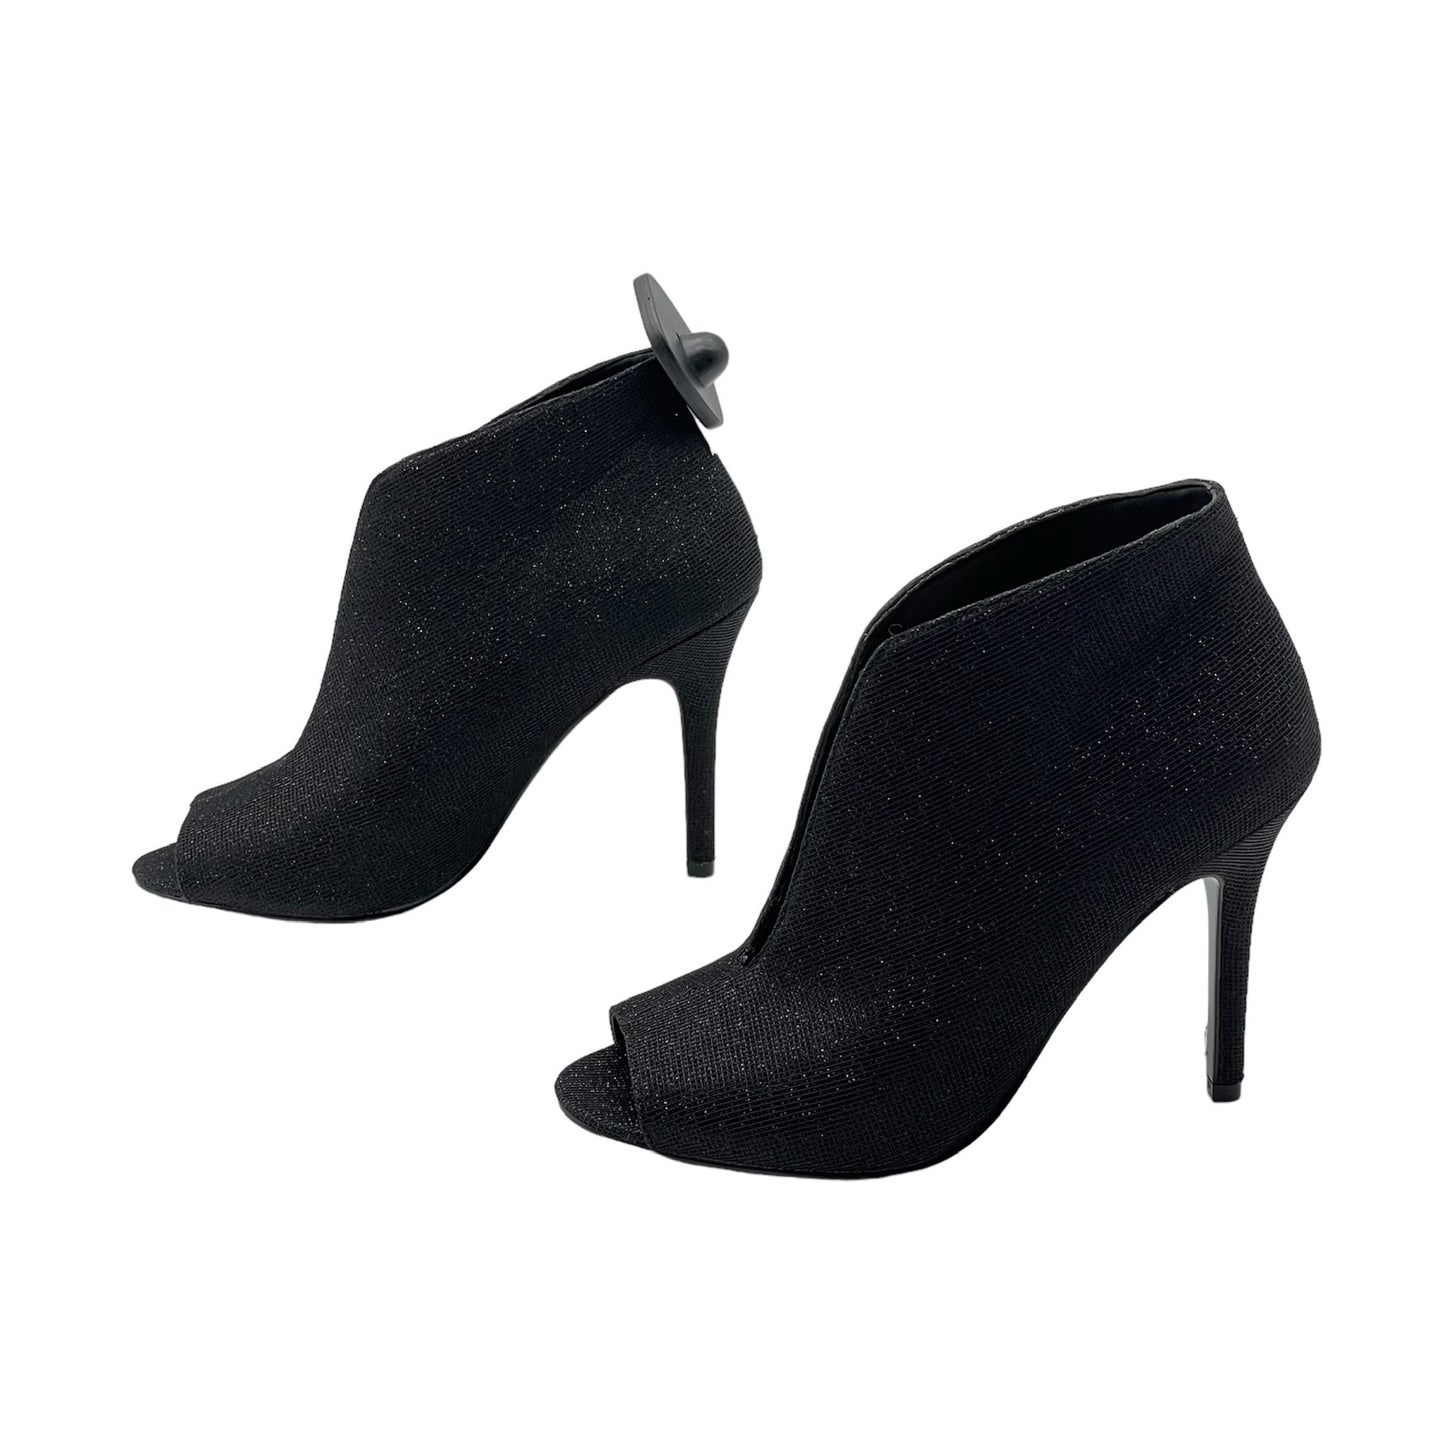 Shoes Heels Stiletto By Nina  Size: 6.5